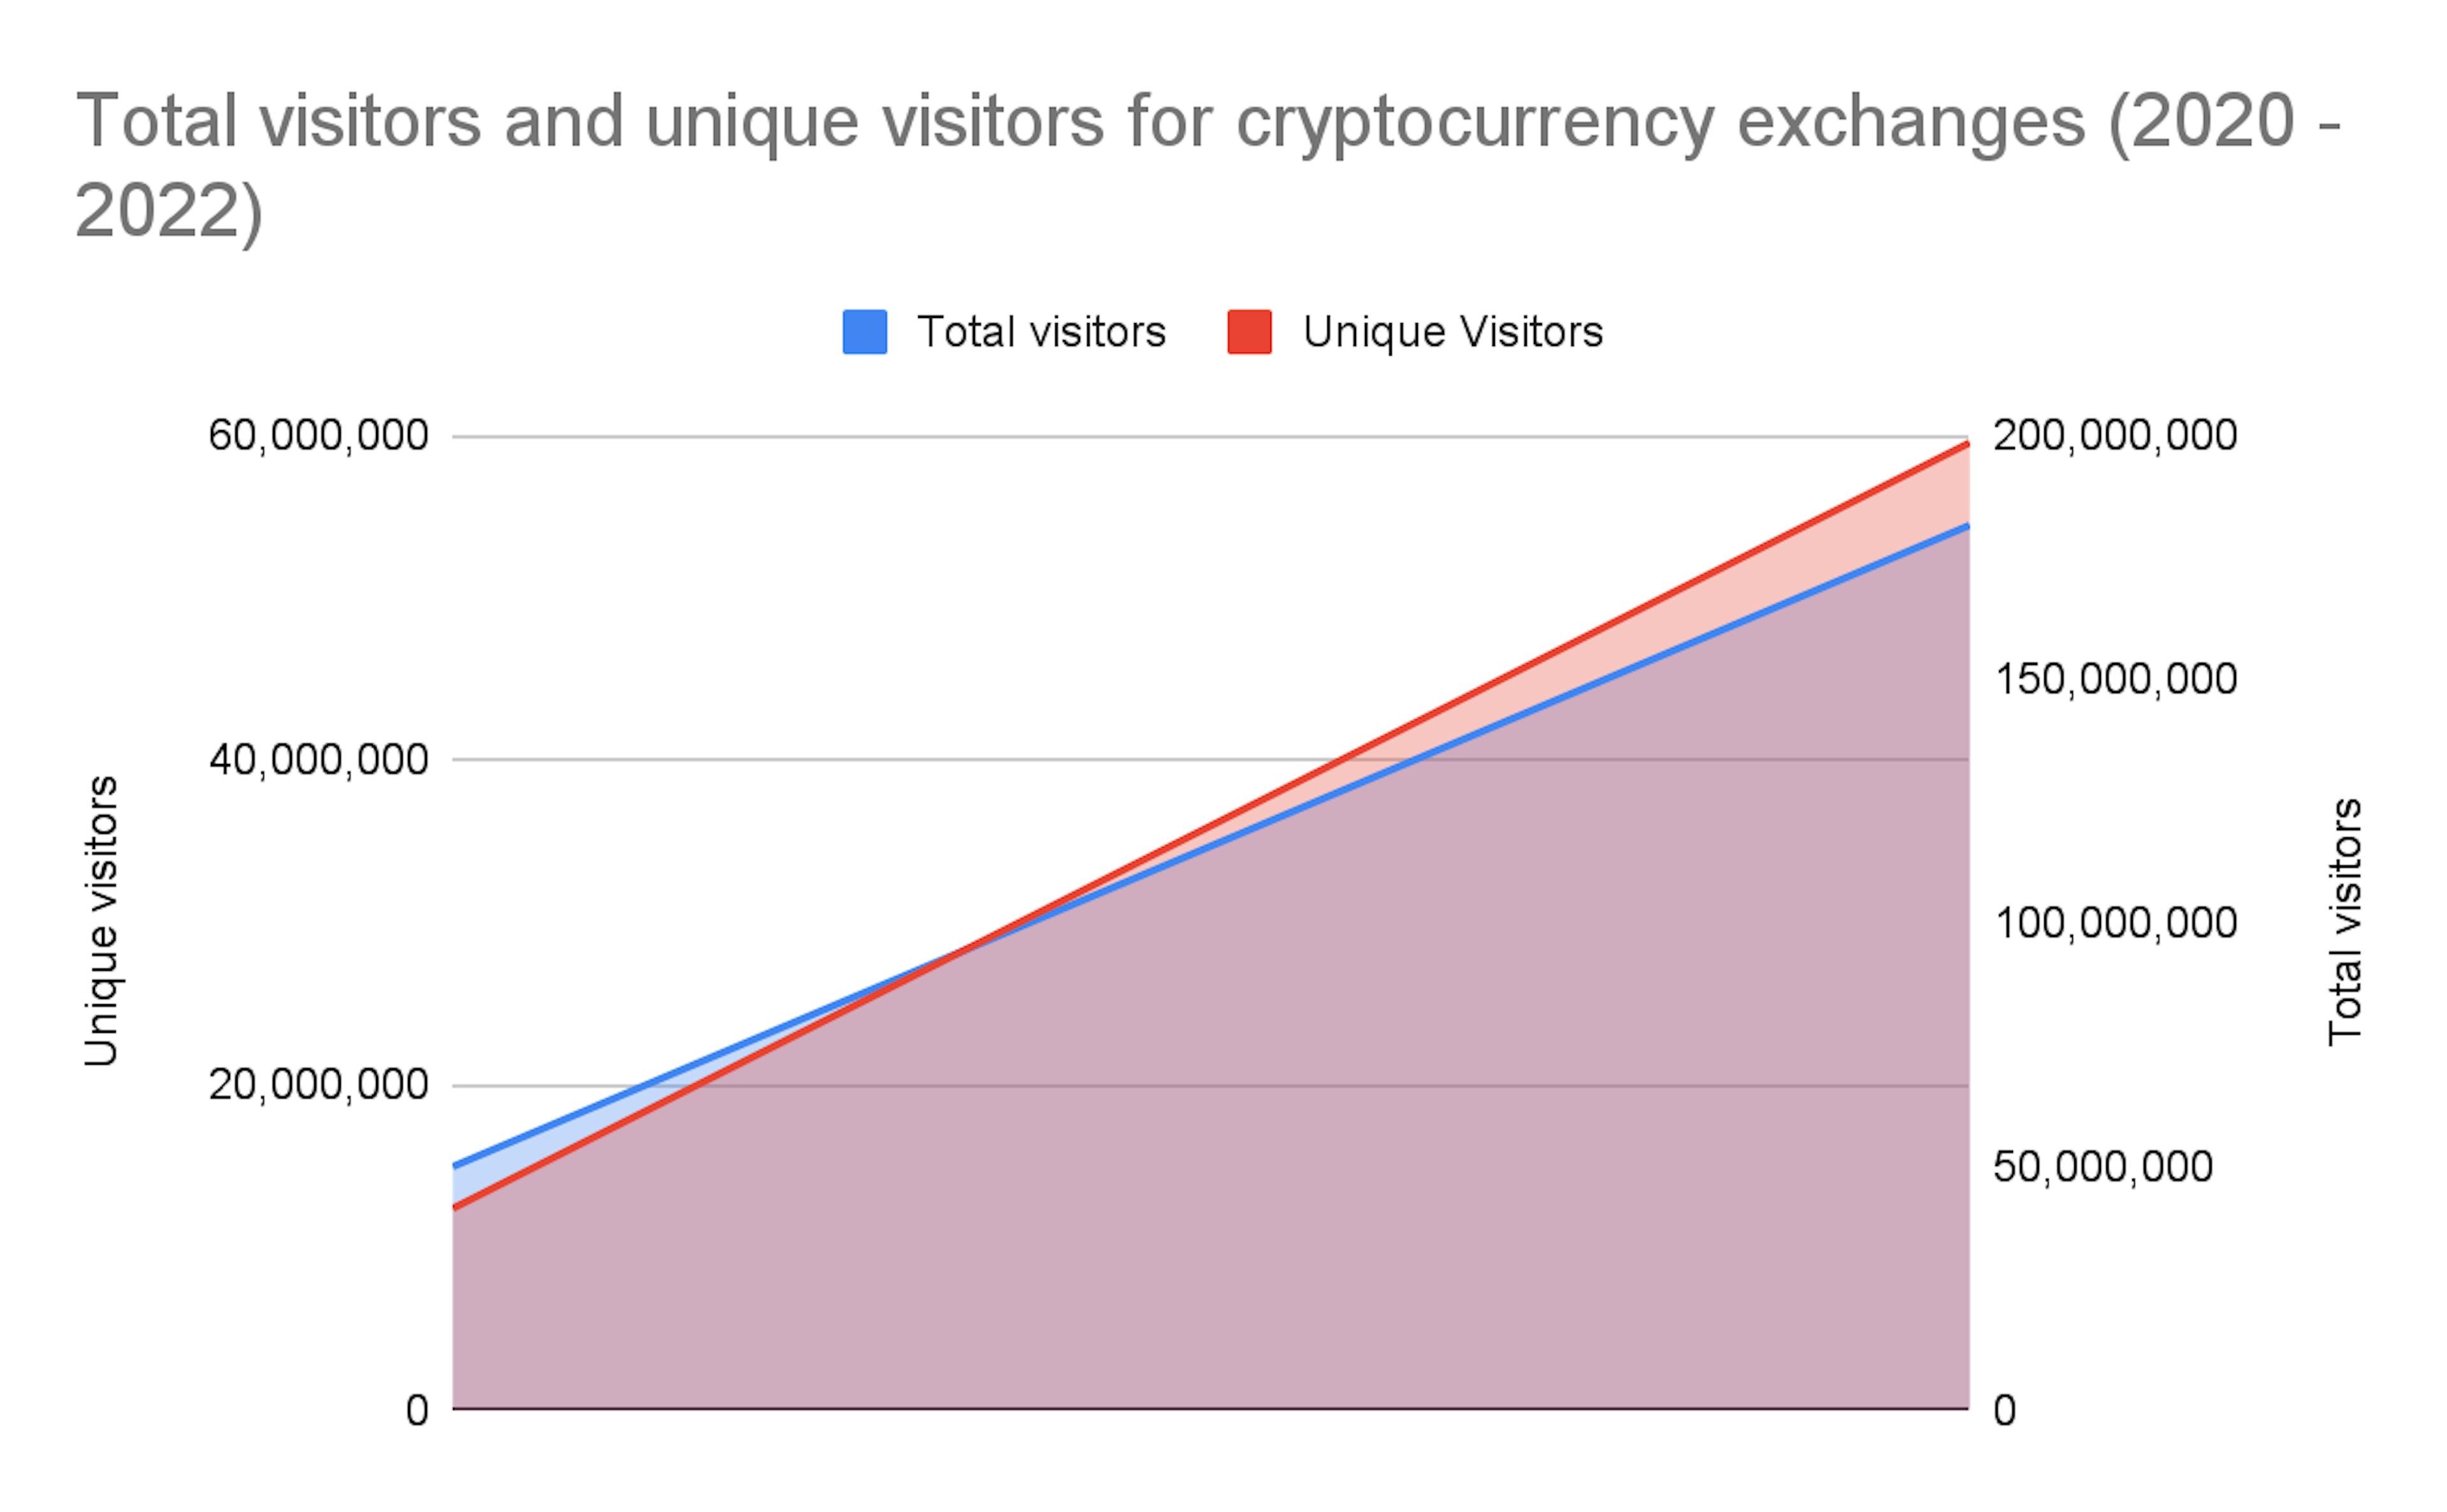 How total visitors and unique visitors to cryptocurrency exchanges changed between 2020-2022